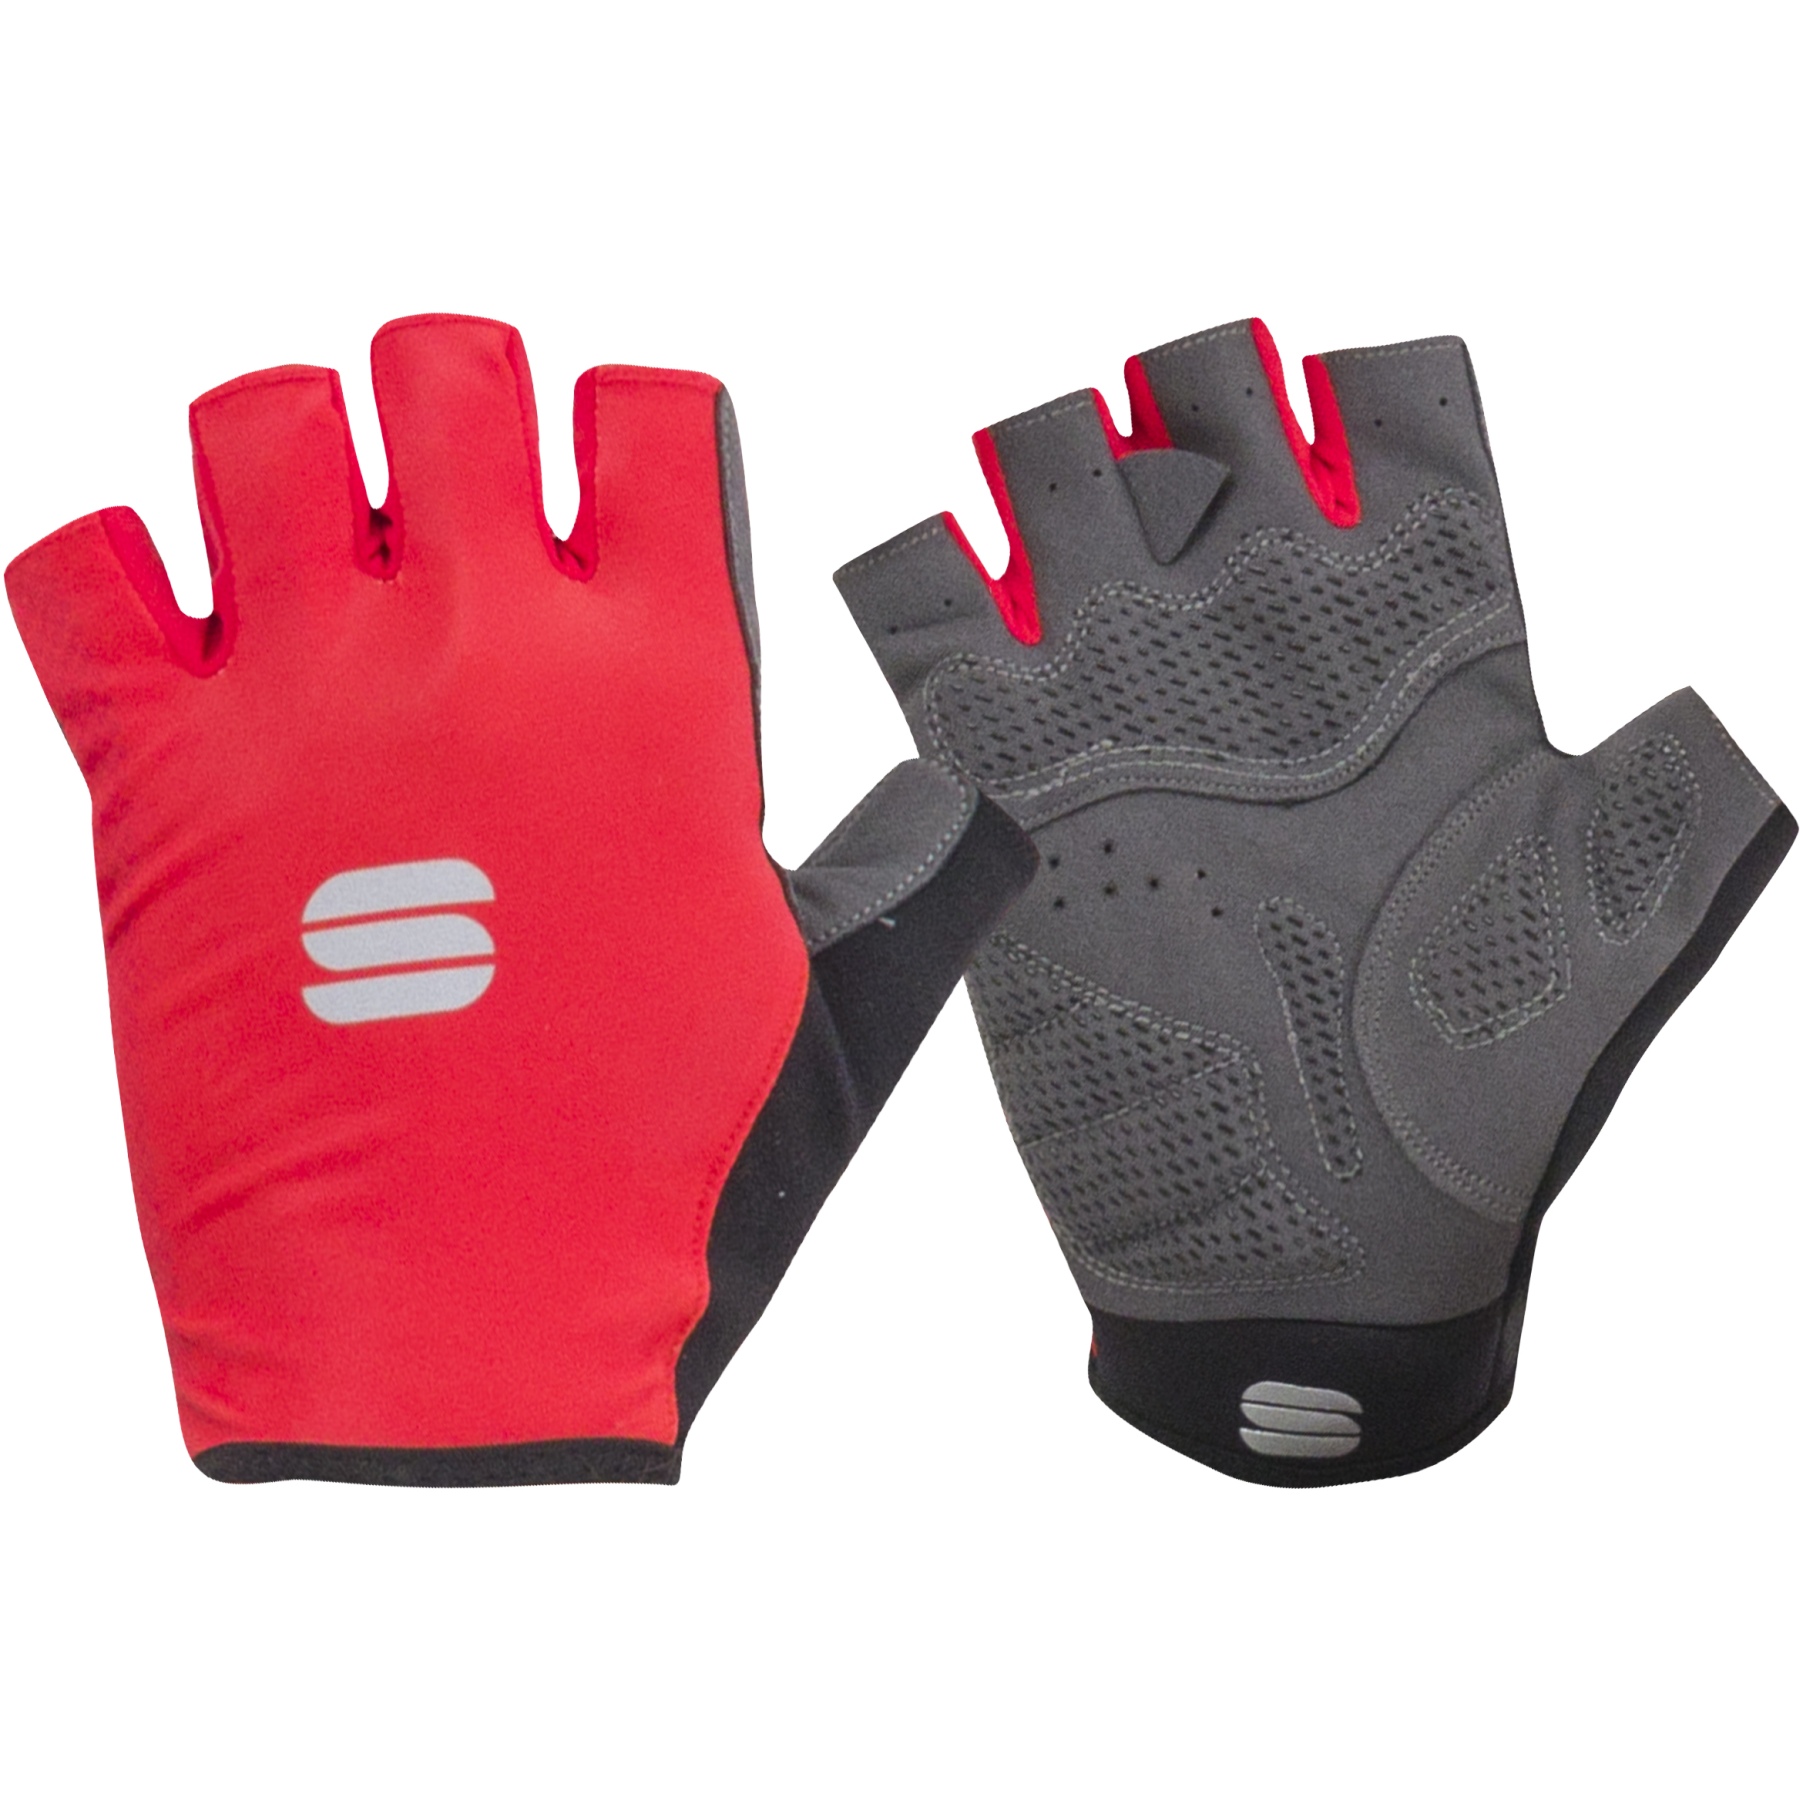 Picture of Sportful Race Cycling Gloves - 140 Chili Red